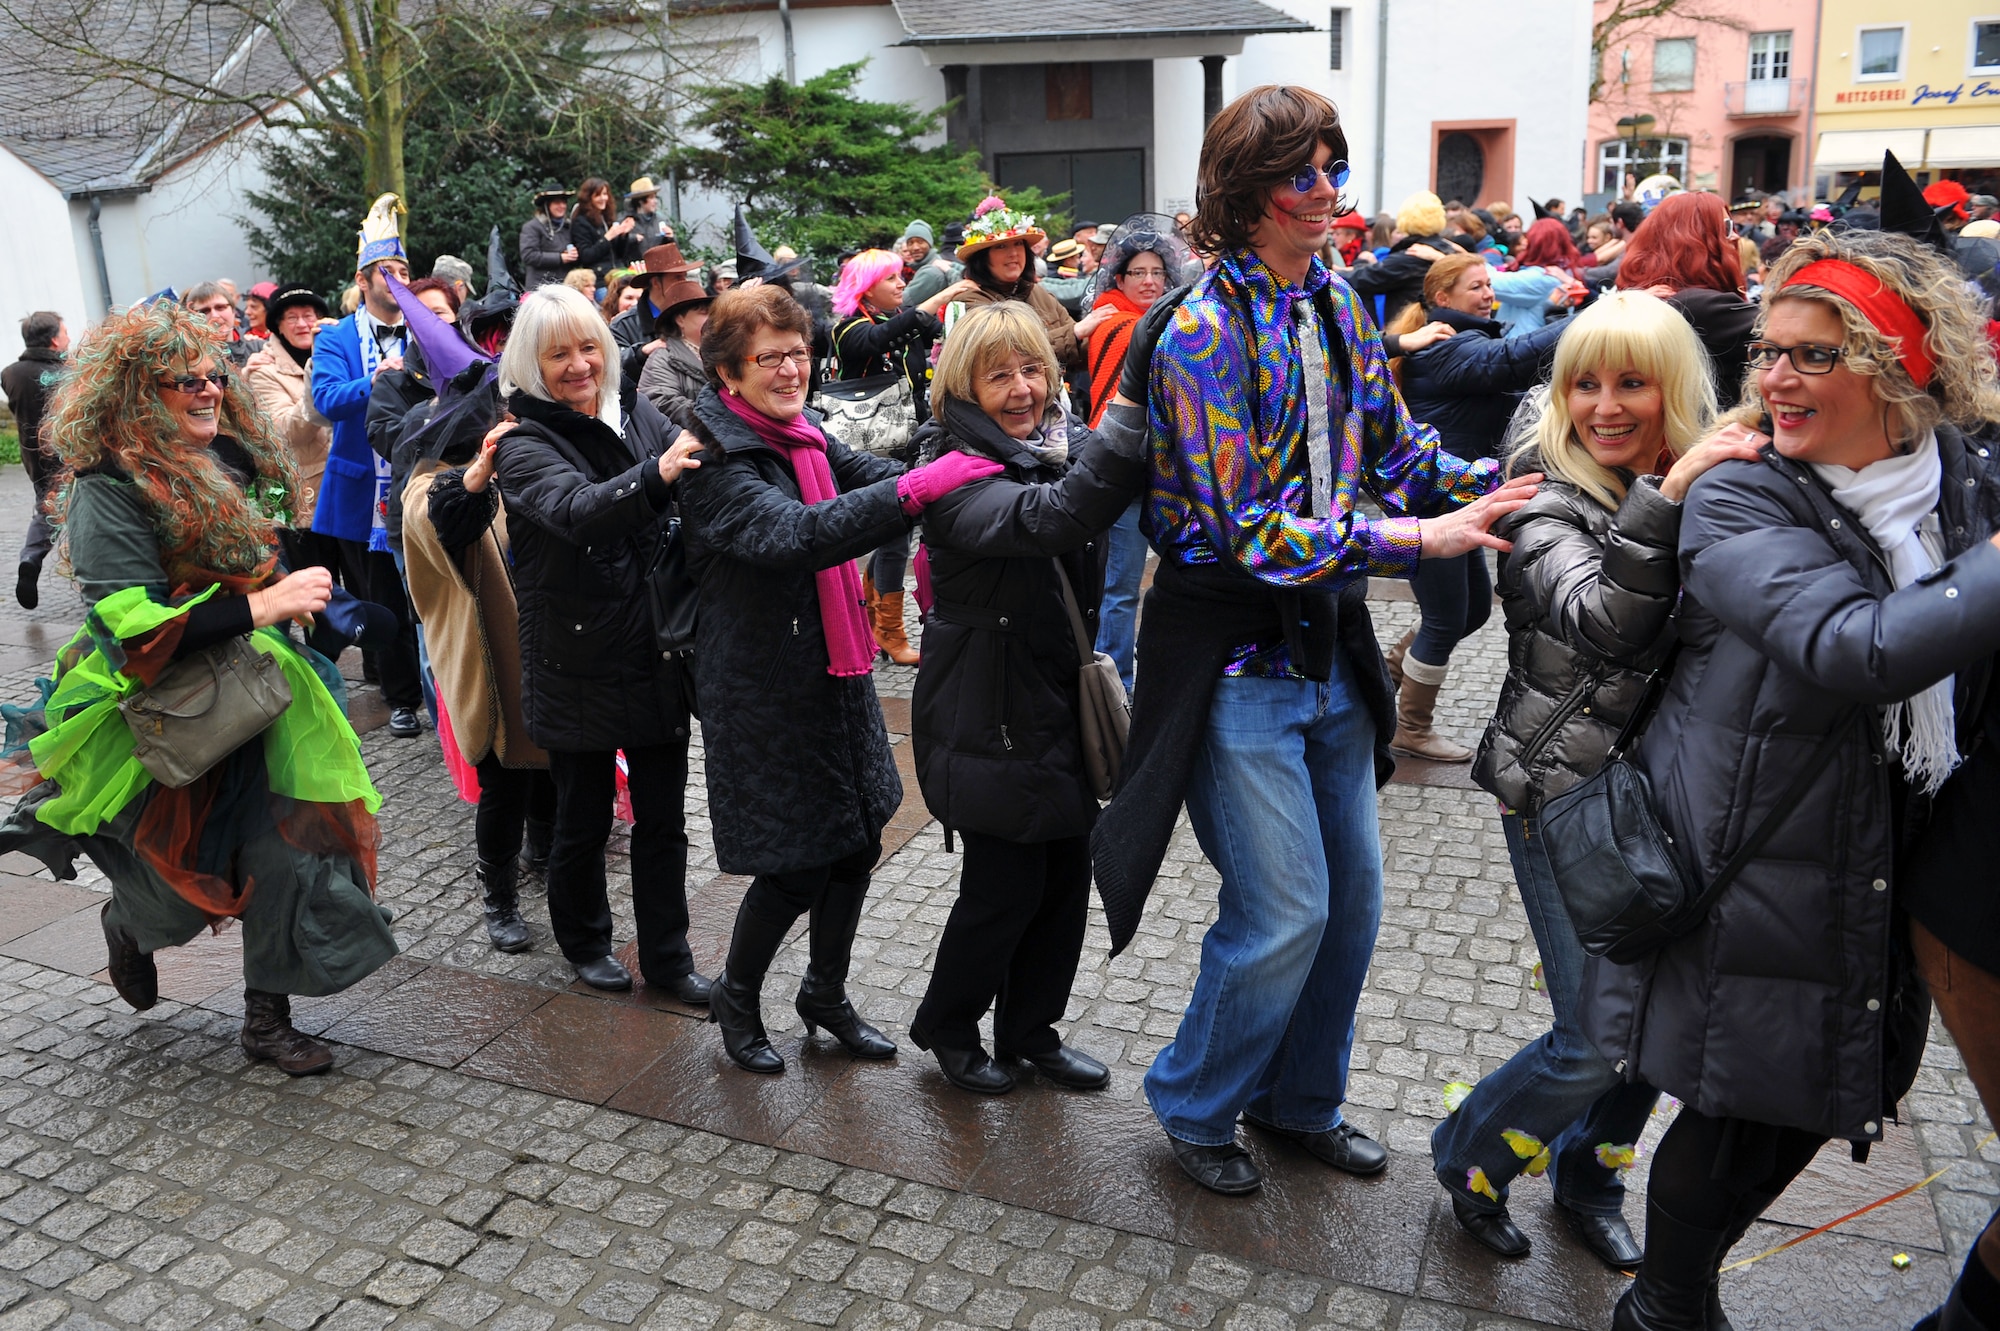 BITBURG, Germany – Local German nationals and American military service members participate in a dance line during Ladies Fasching Day celebrations at the Bitburg Town Hall here Feb. 16. Ladies Fasching Day is a German celebration where women “take over” the city for the day. Once the ladies have “taken over” the city hall, the celebrations begin with dancing and parading throughout the city. The traditional Fasching celebrations begin the Thursday prior to Lent at the 11th minute past the 11th hour, continue until Ash Wednesday and allow people to indulge before the Lent season. (U.S. Air Force photo by Airman 1st Class Dillon Davis/Released)